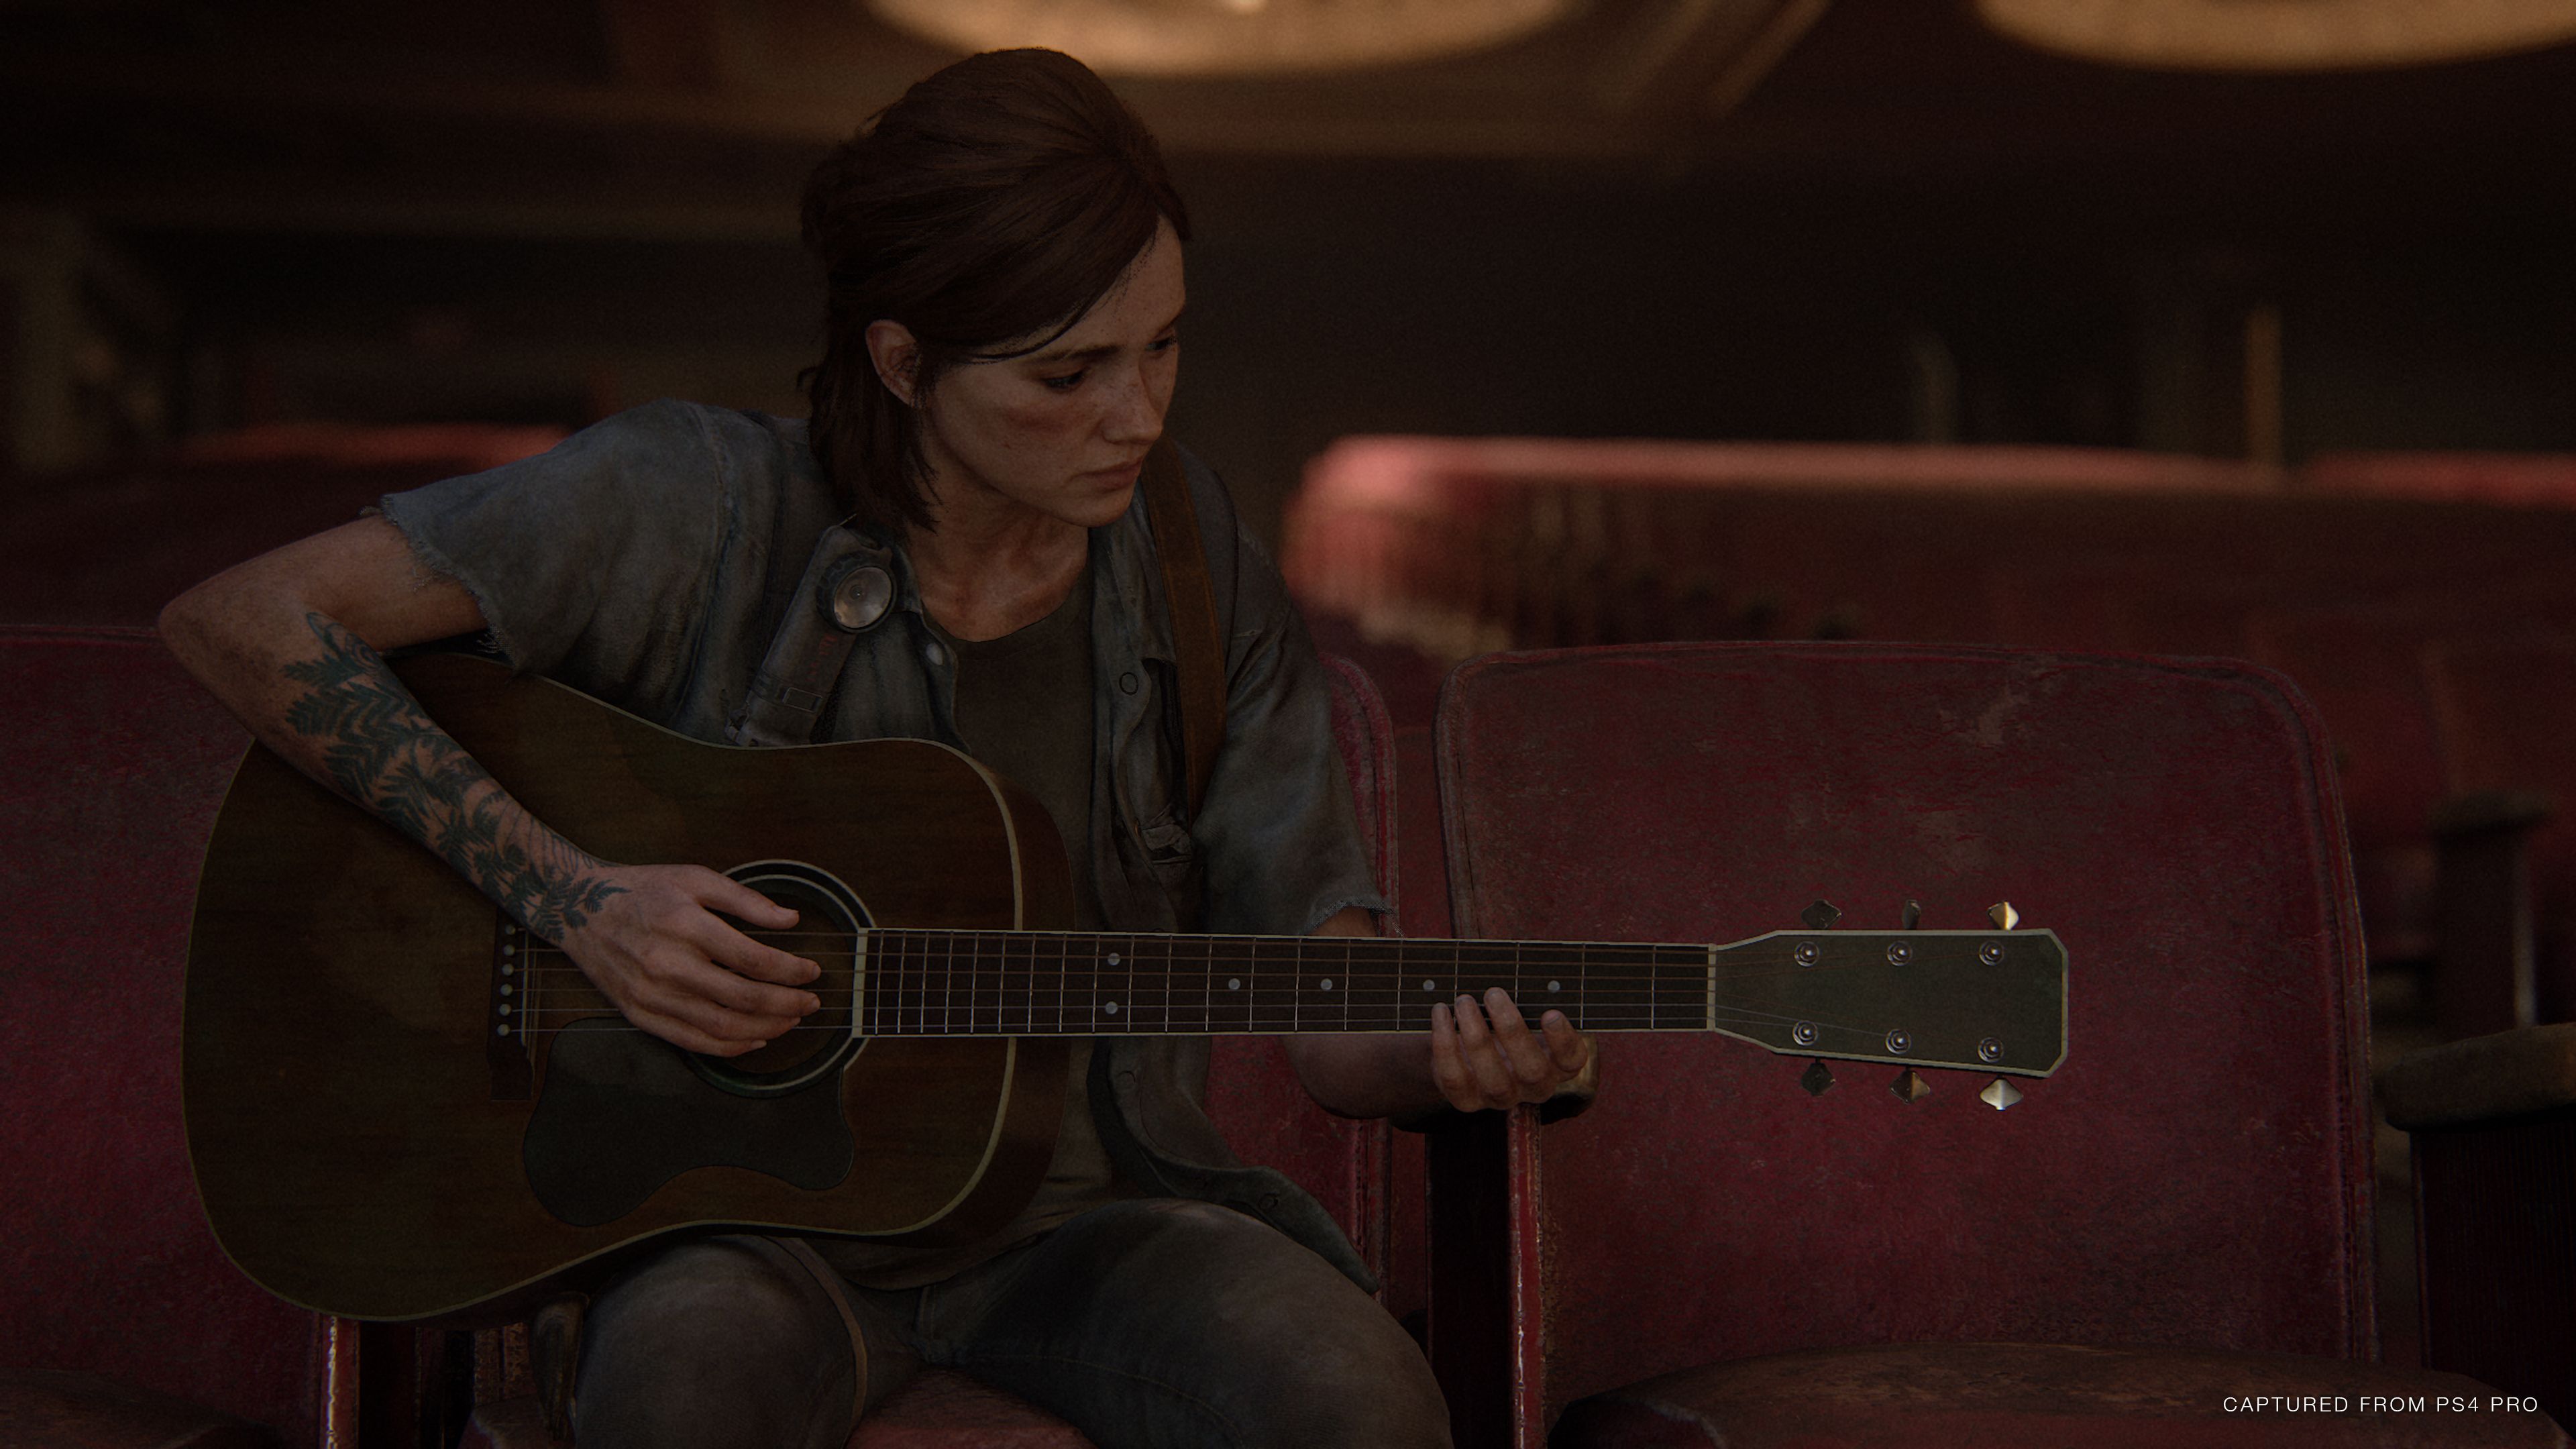 The Last Of Us 2 Ending Explained: A Spoiler Filled Look At What